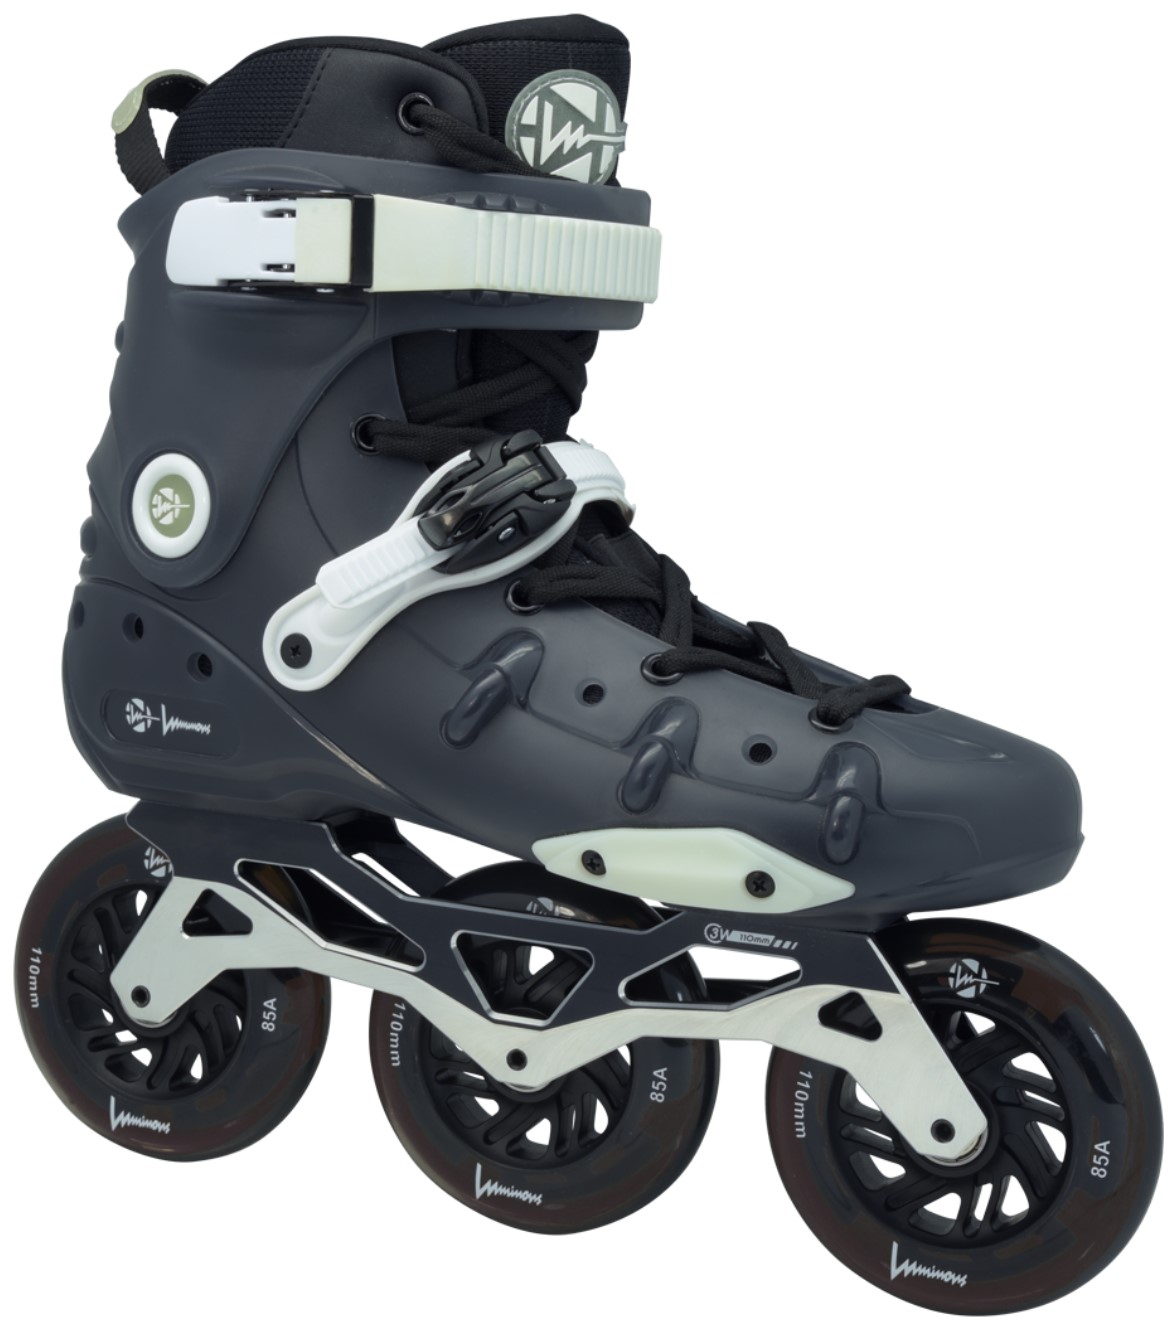 Luminous Ray 110 Dark inline skate with 3 Luminous wheels of 110 mm and glowing parts on the inline skate